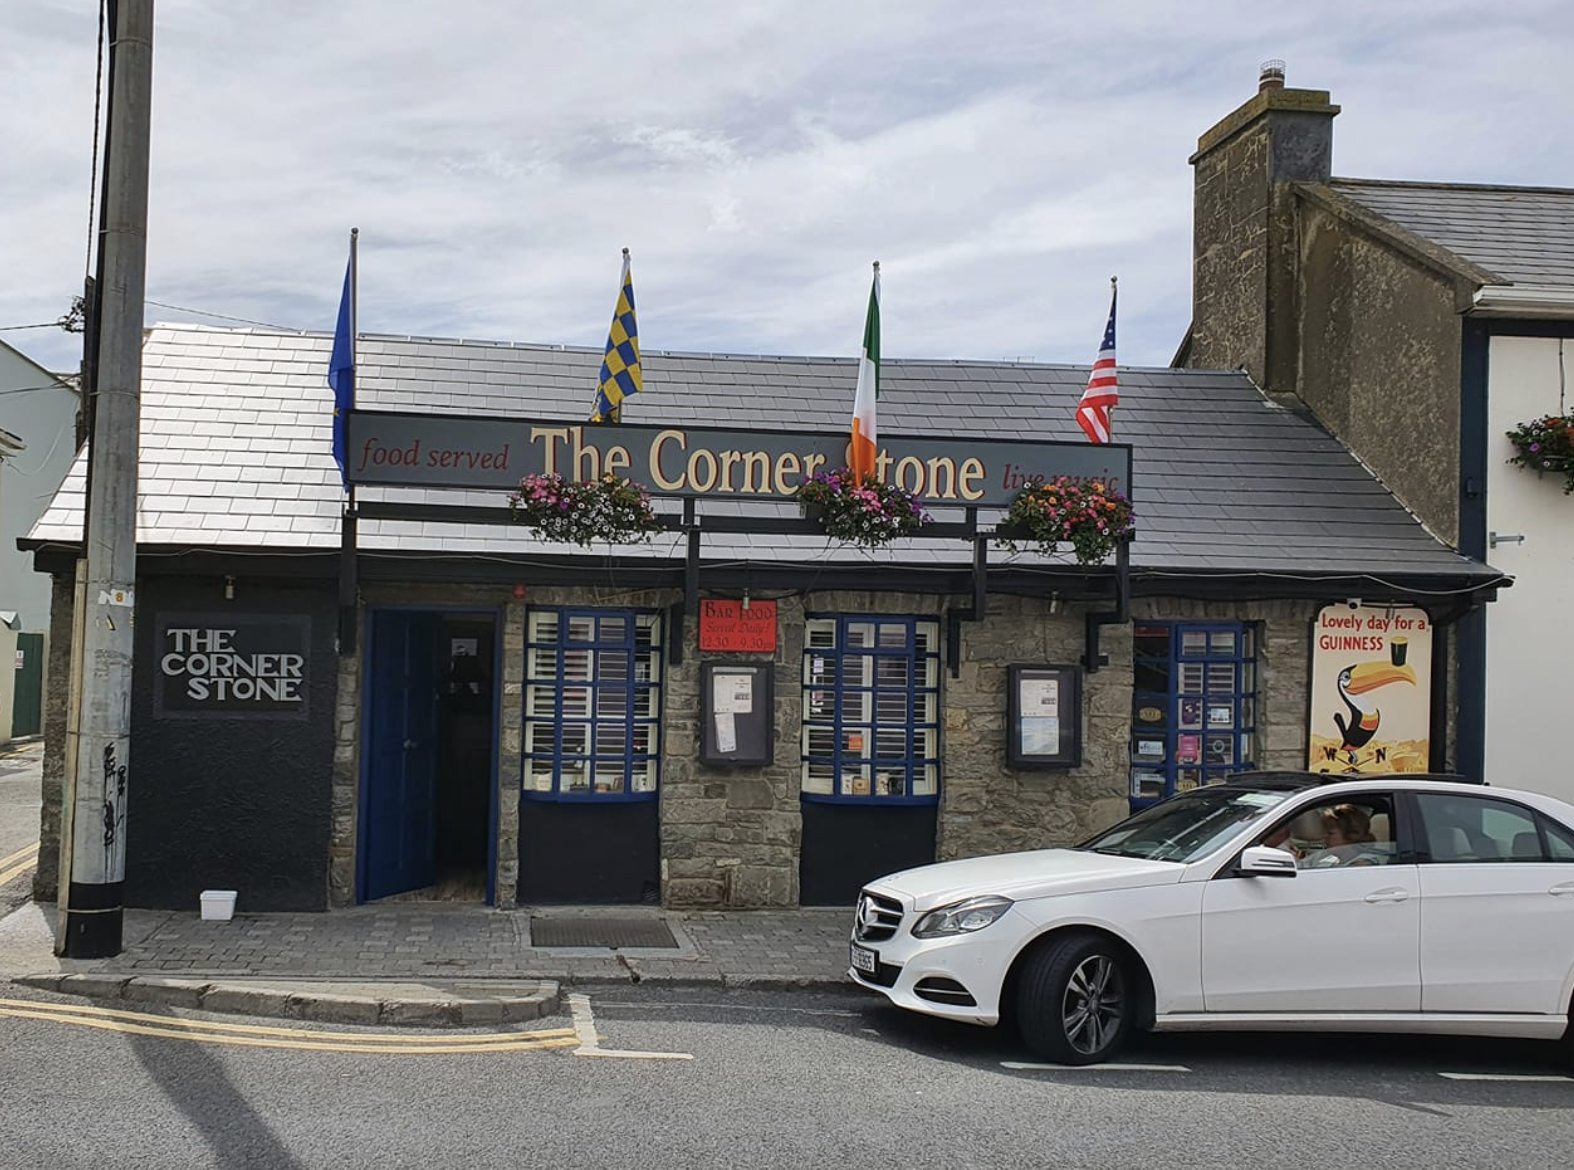 Local Lahinch favourite back open after Covid-19 scare